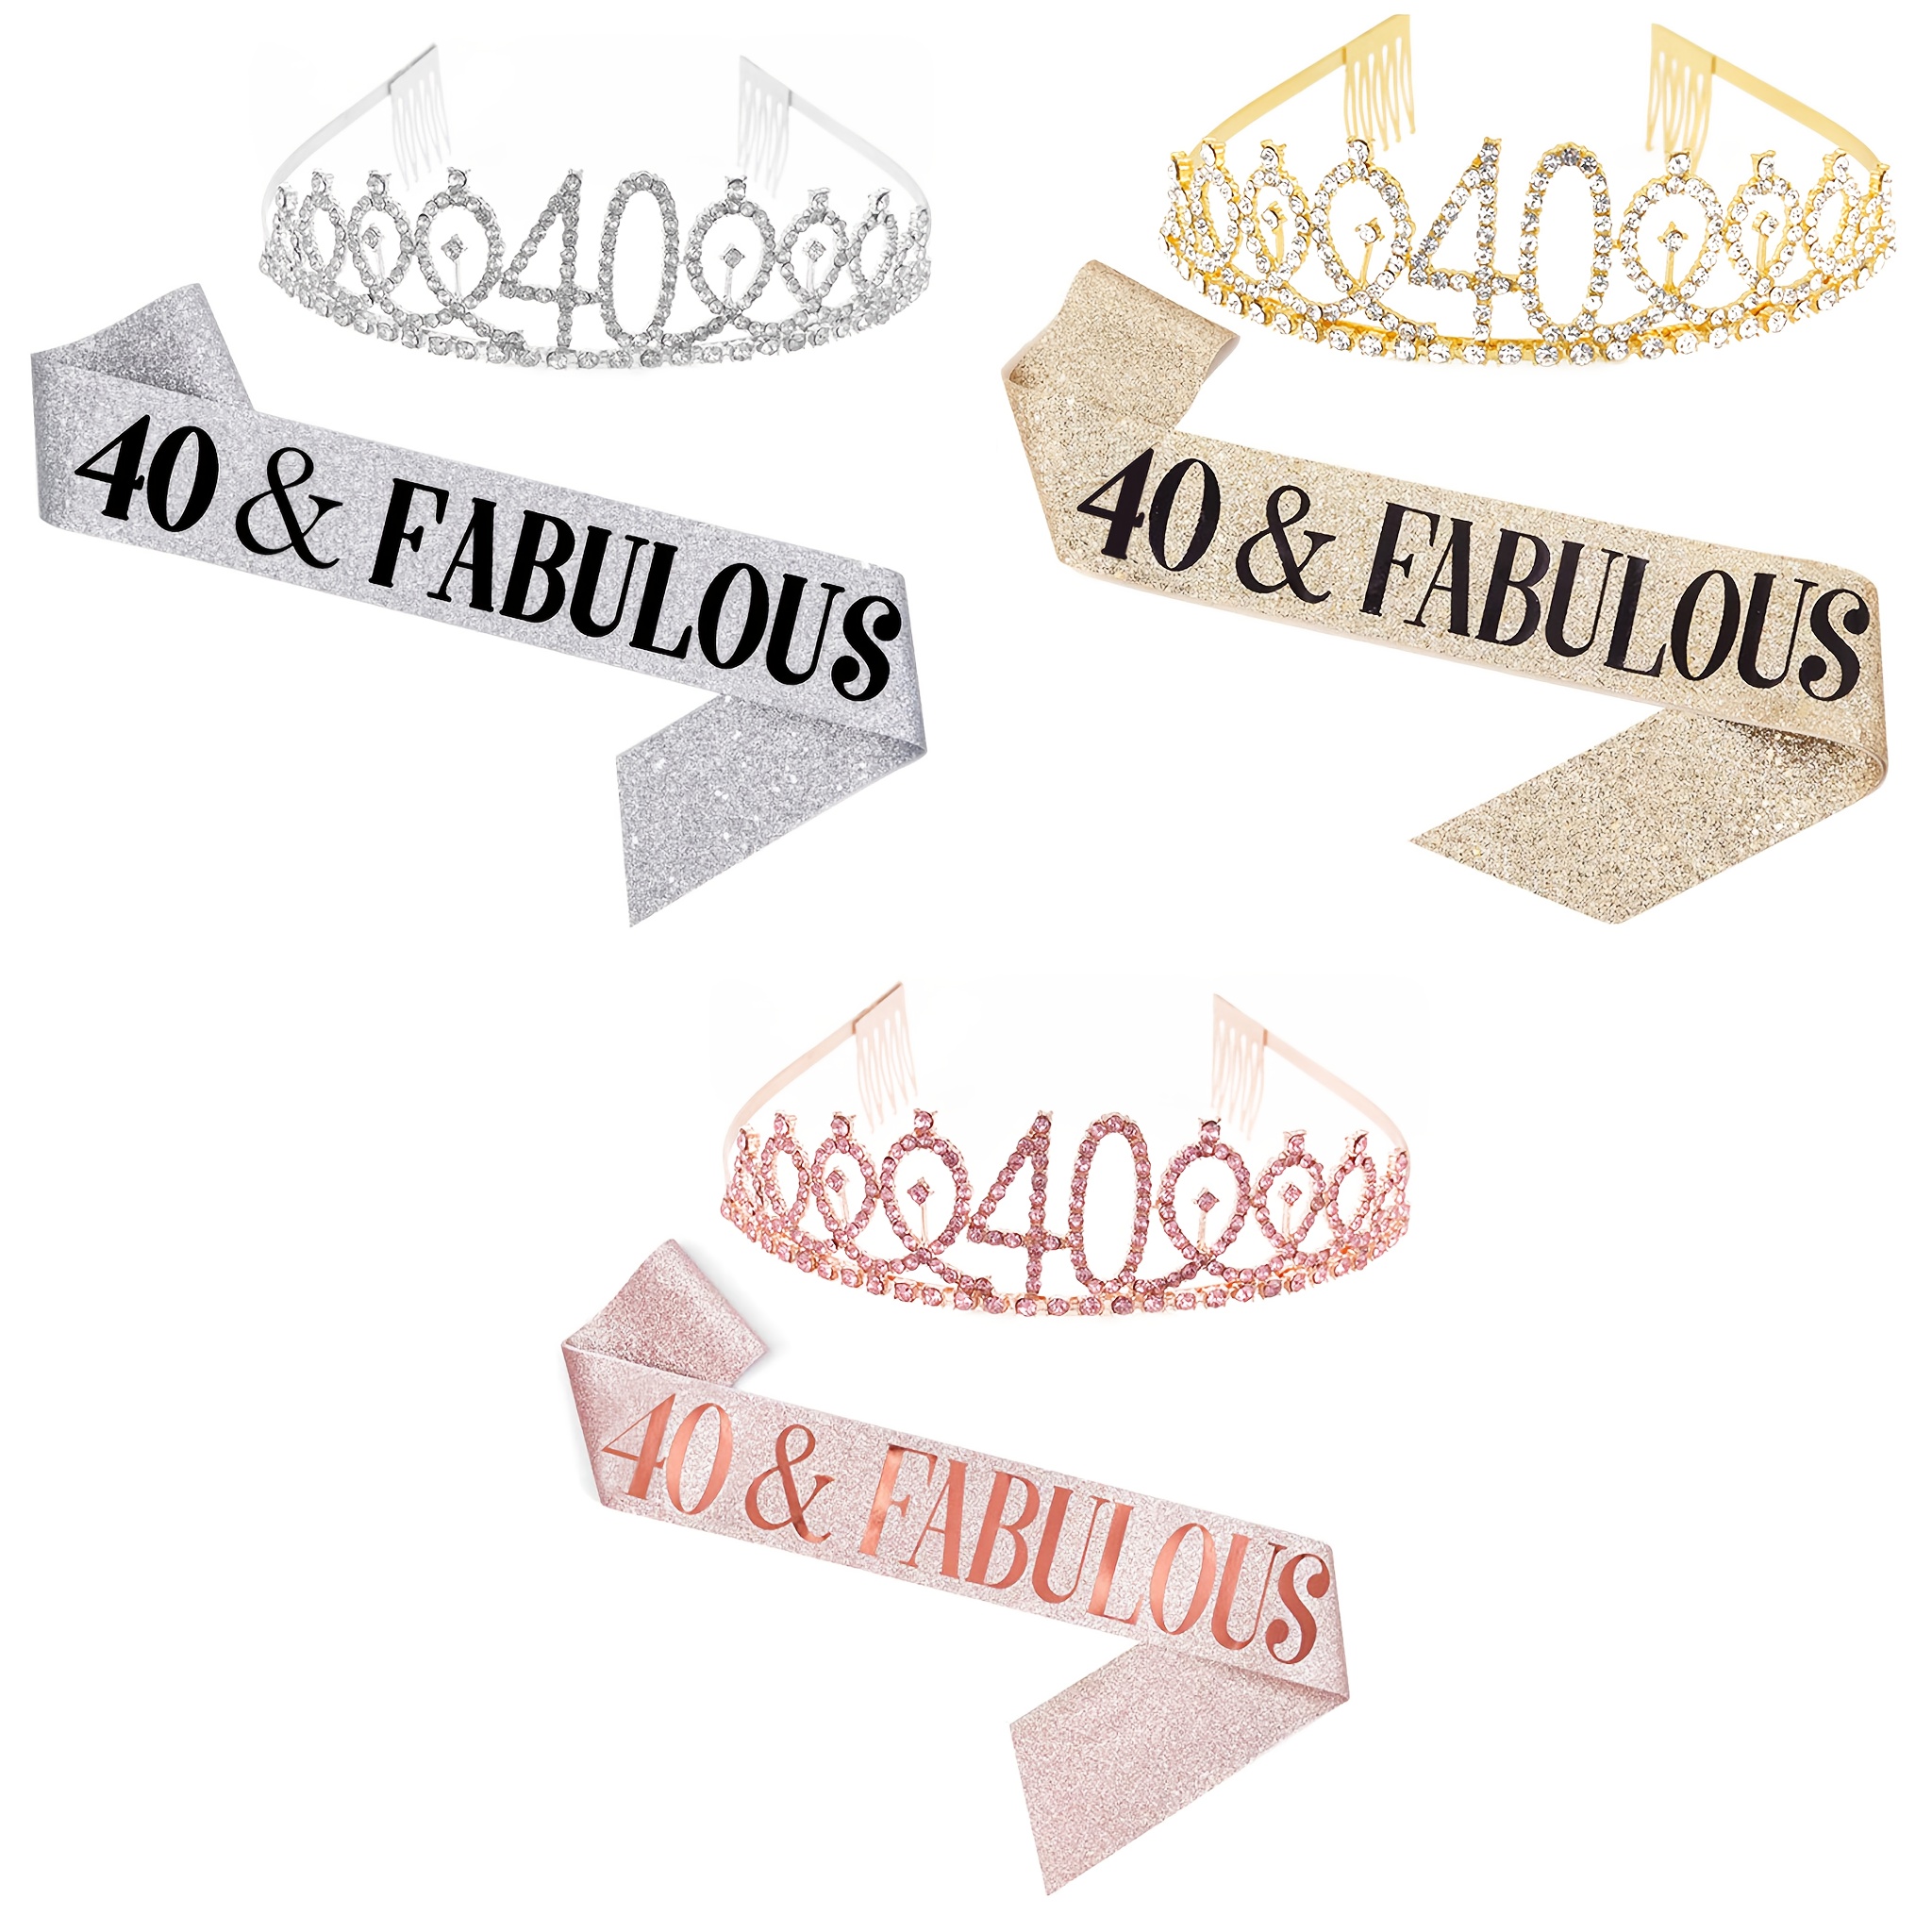 

2pcs/set, Birthday Sash And Tiara Set, Birthday Gifts For Women Friends, Birthday Decorations For Women, Happy Birthday Party Favor